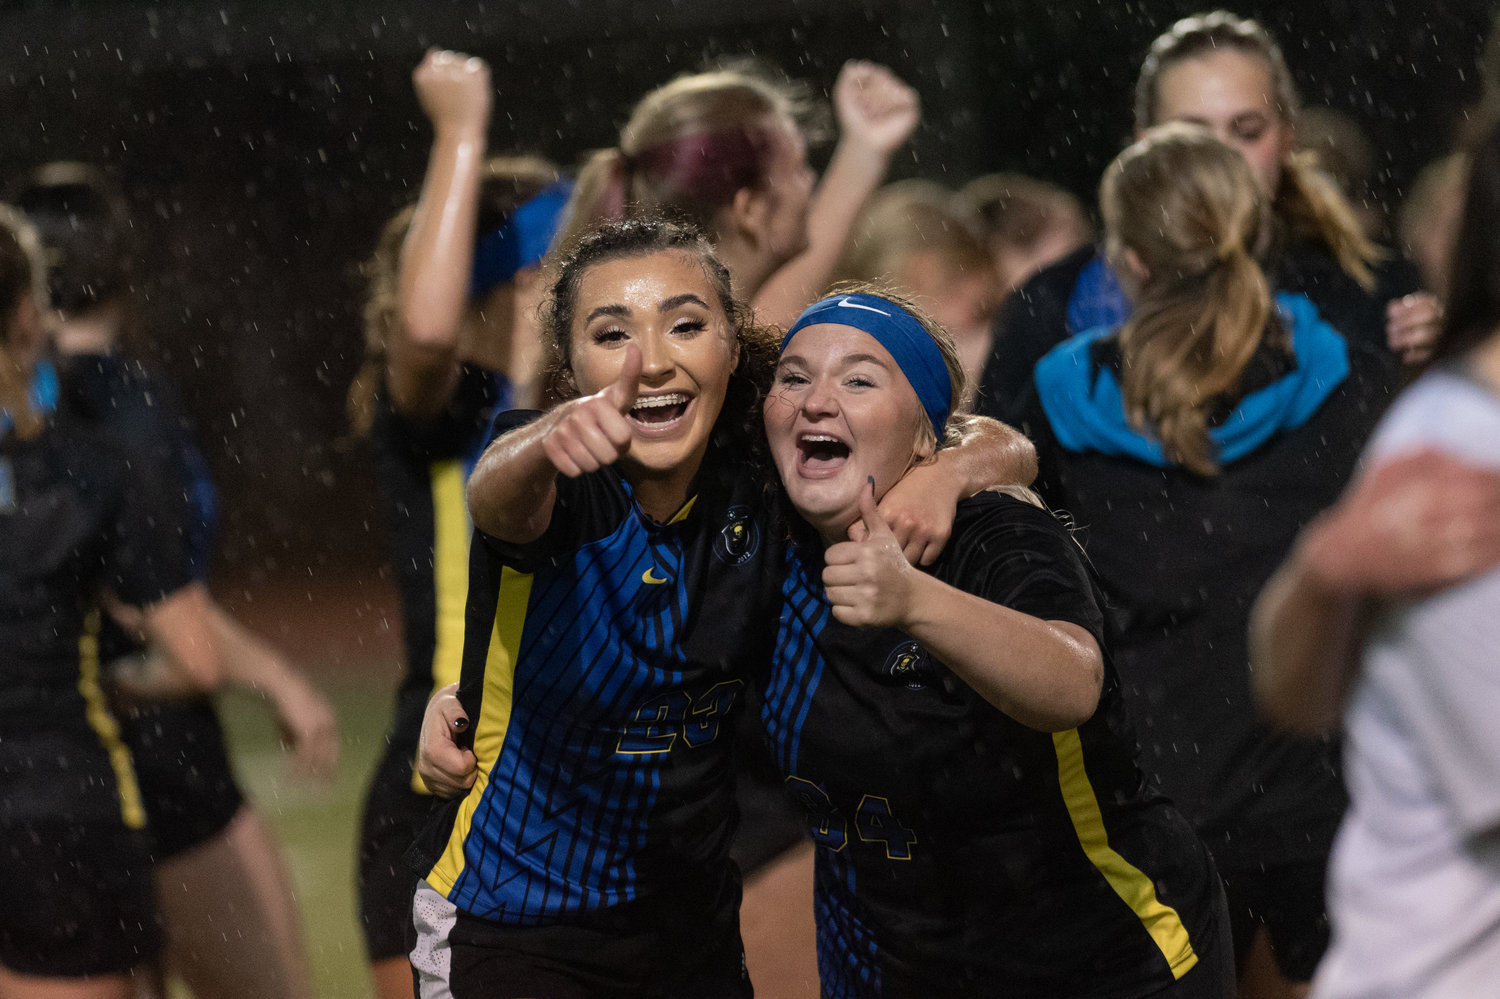 Adna seniors Presley Smith and Sadie Burdick celebrate after beating Cle Elum-Roslyn in the opening round of the state tournament in Tumwater Nov. 10.